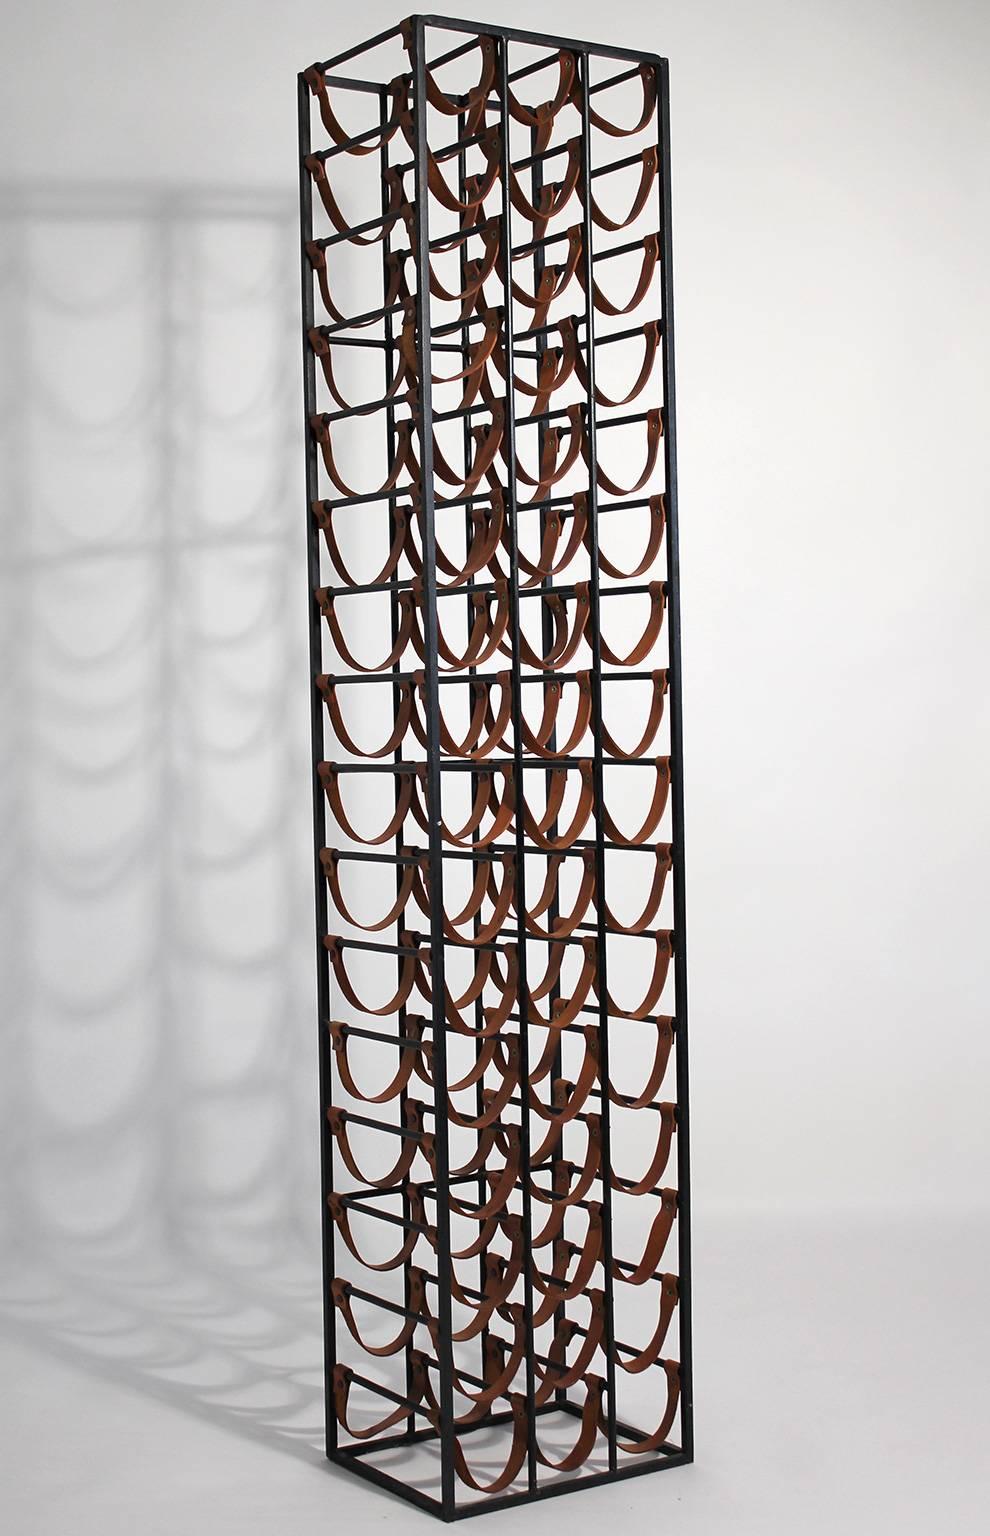 Vintage Mid-Century wrought iron and leather 48 bottle wine rack designed by Arthur Umanoff. Over five feet tall. Original.